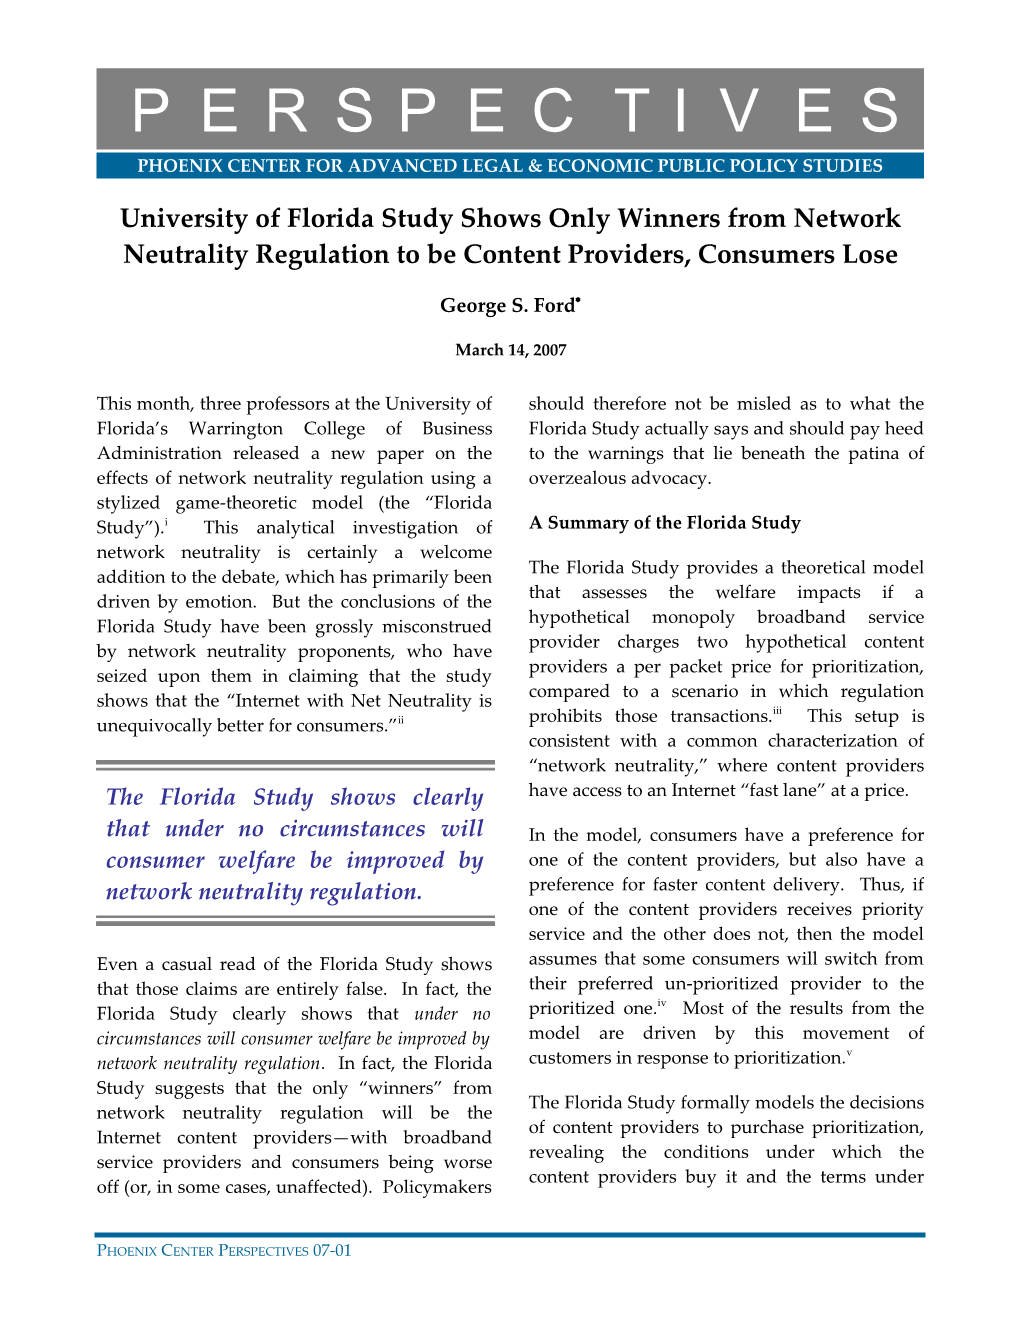 University of Florida Study Shows Only Winners from Network Neutrality Regulation to Be